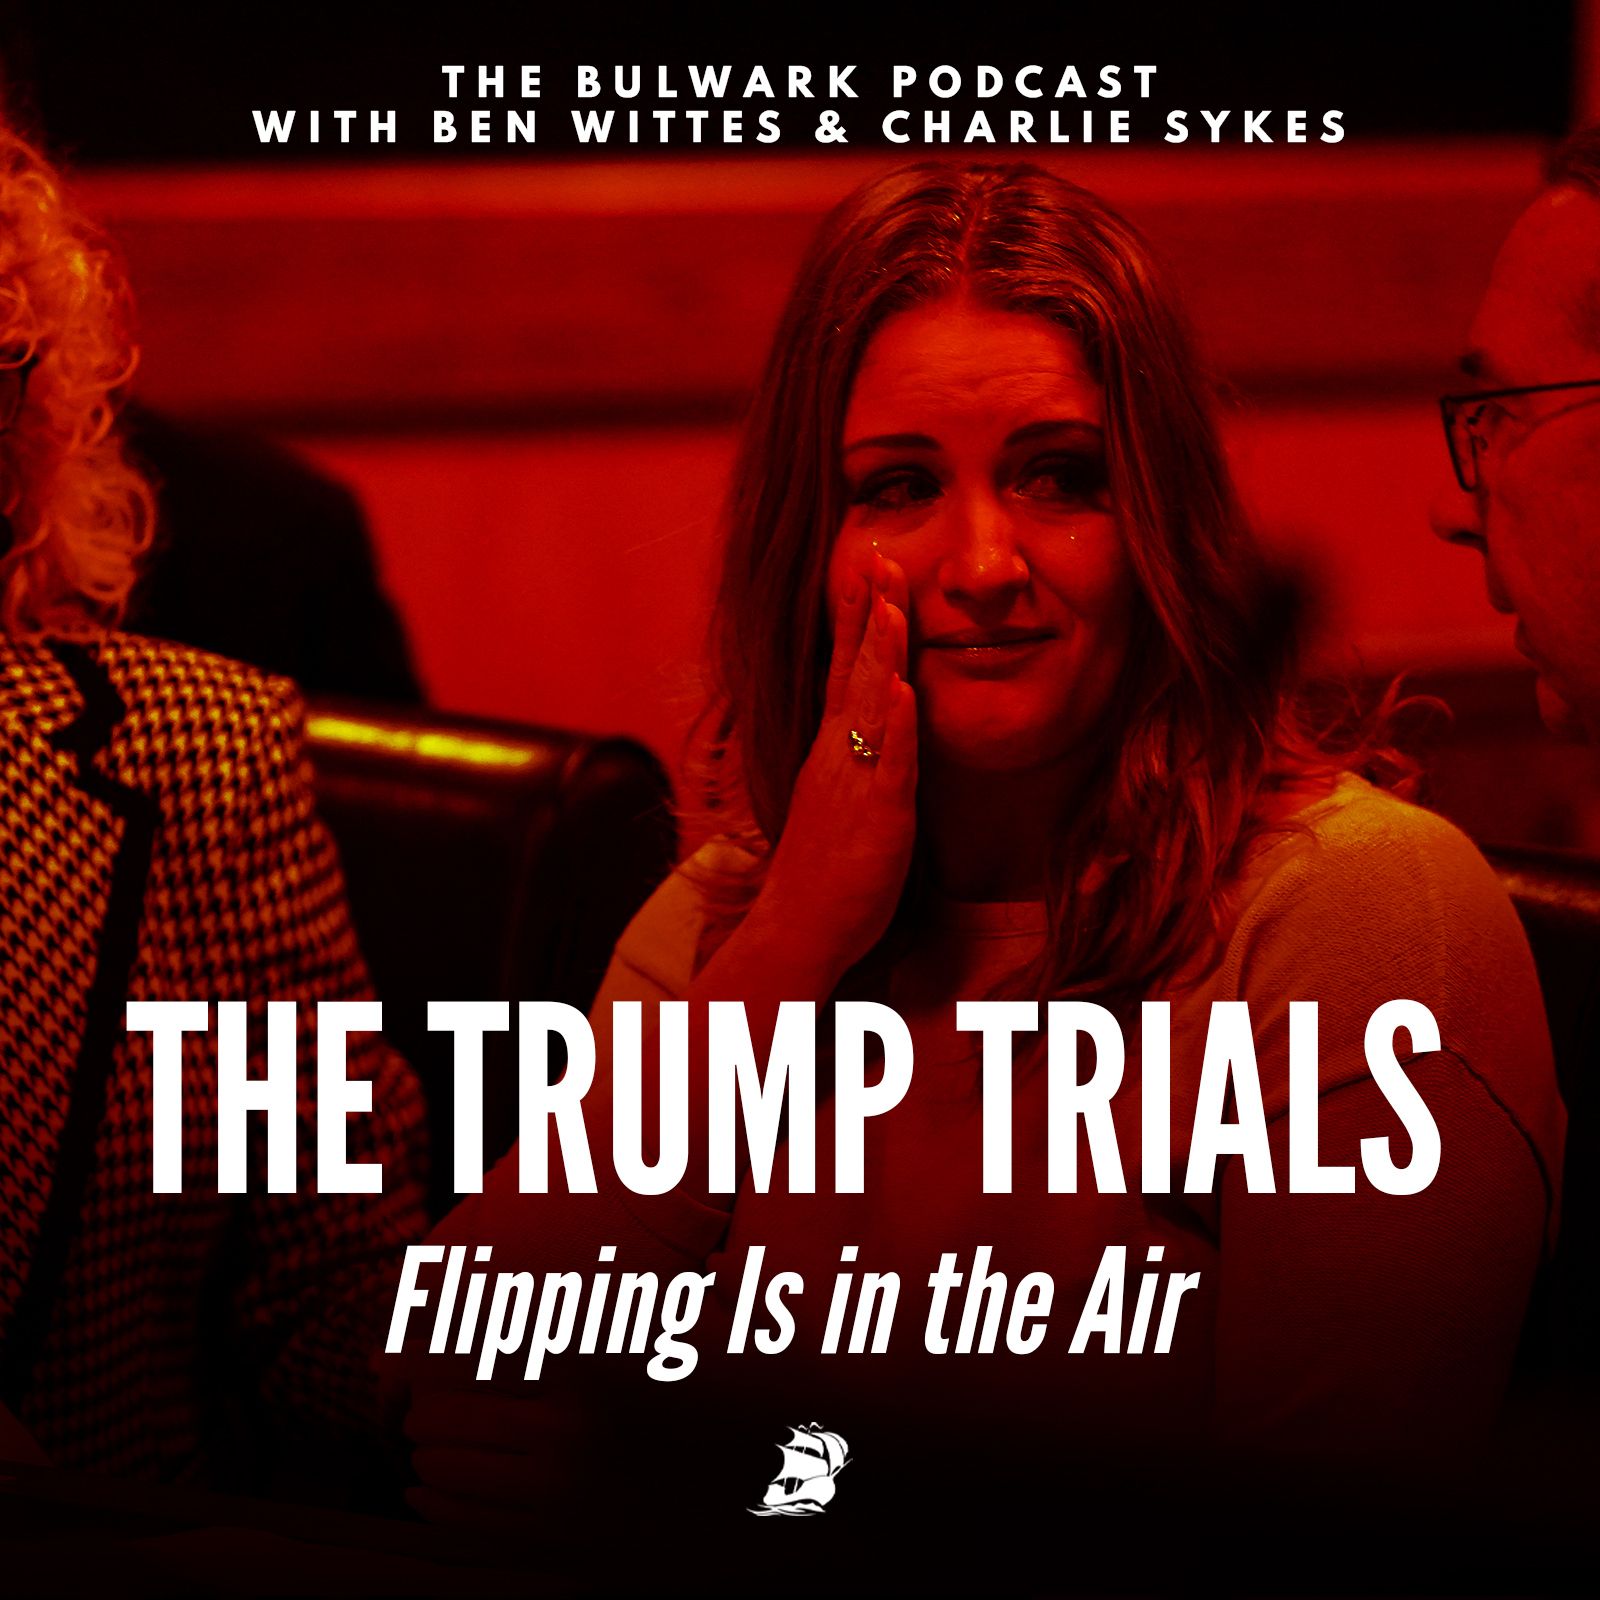 Flipping Is in the Air by The Bulwark Podcast